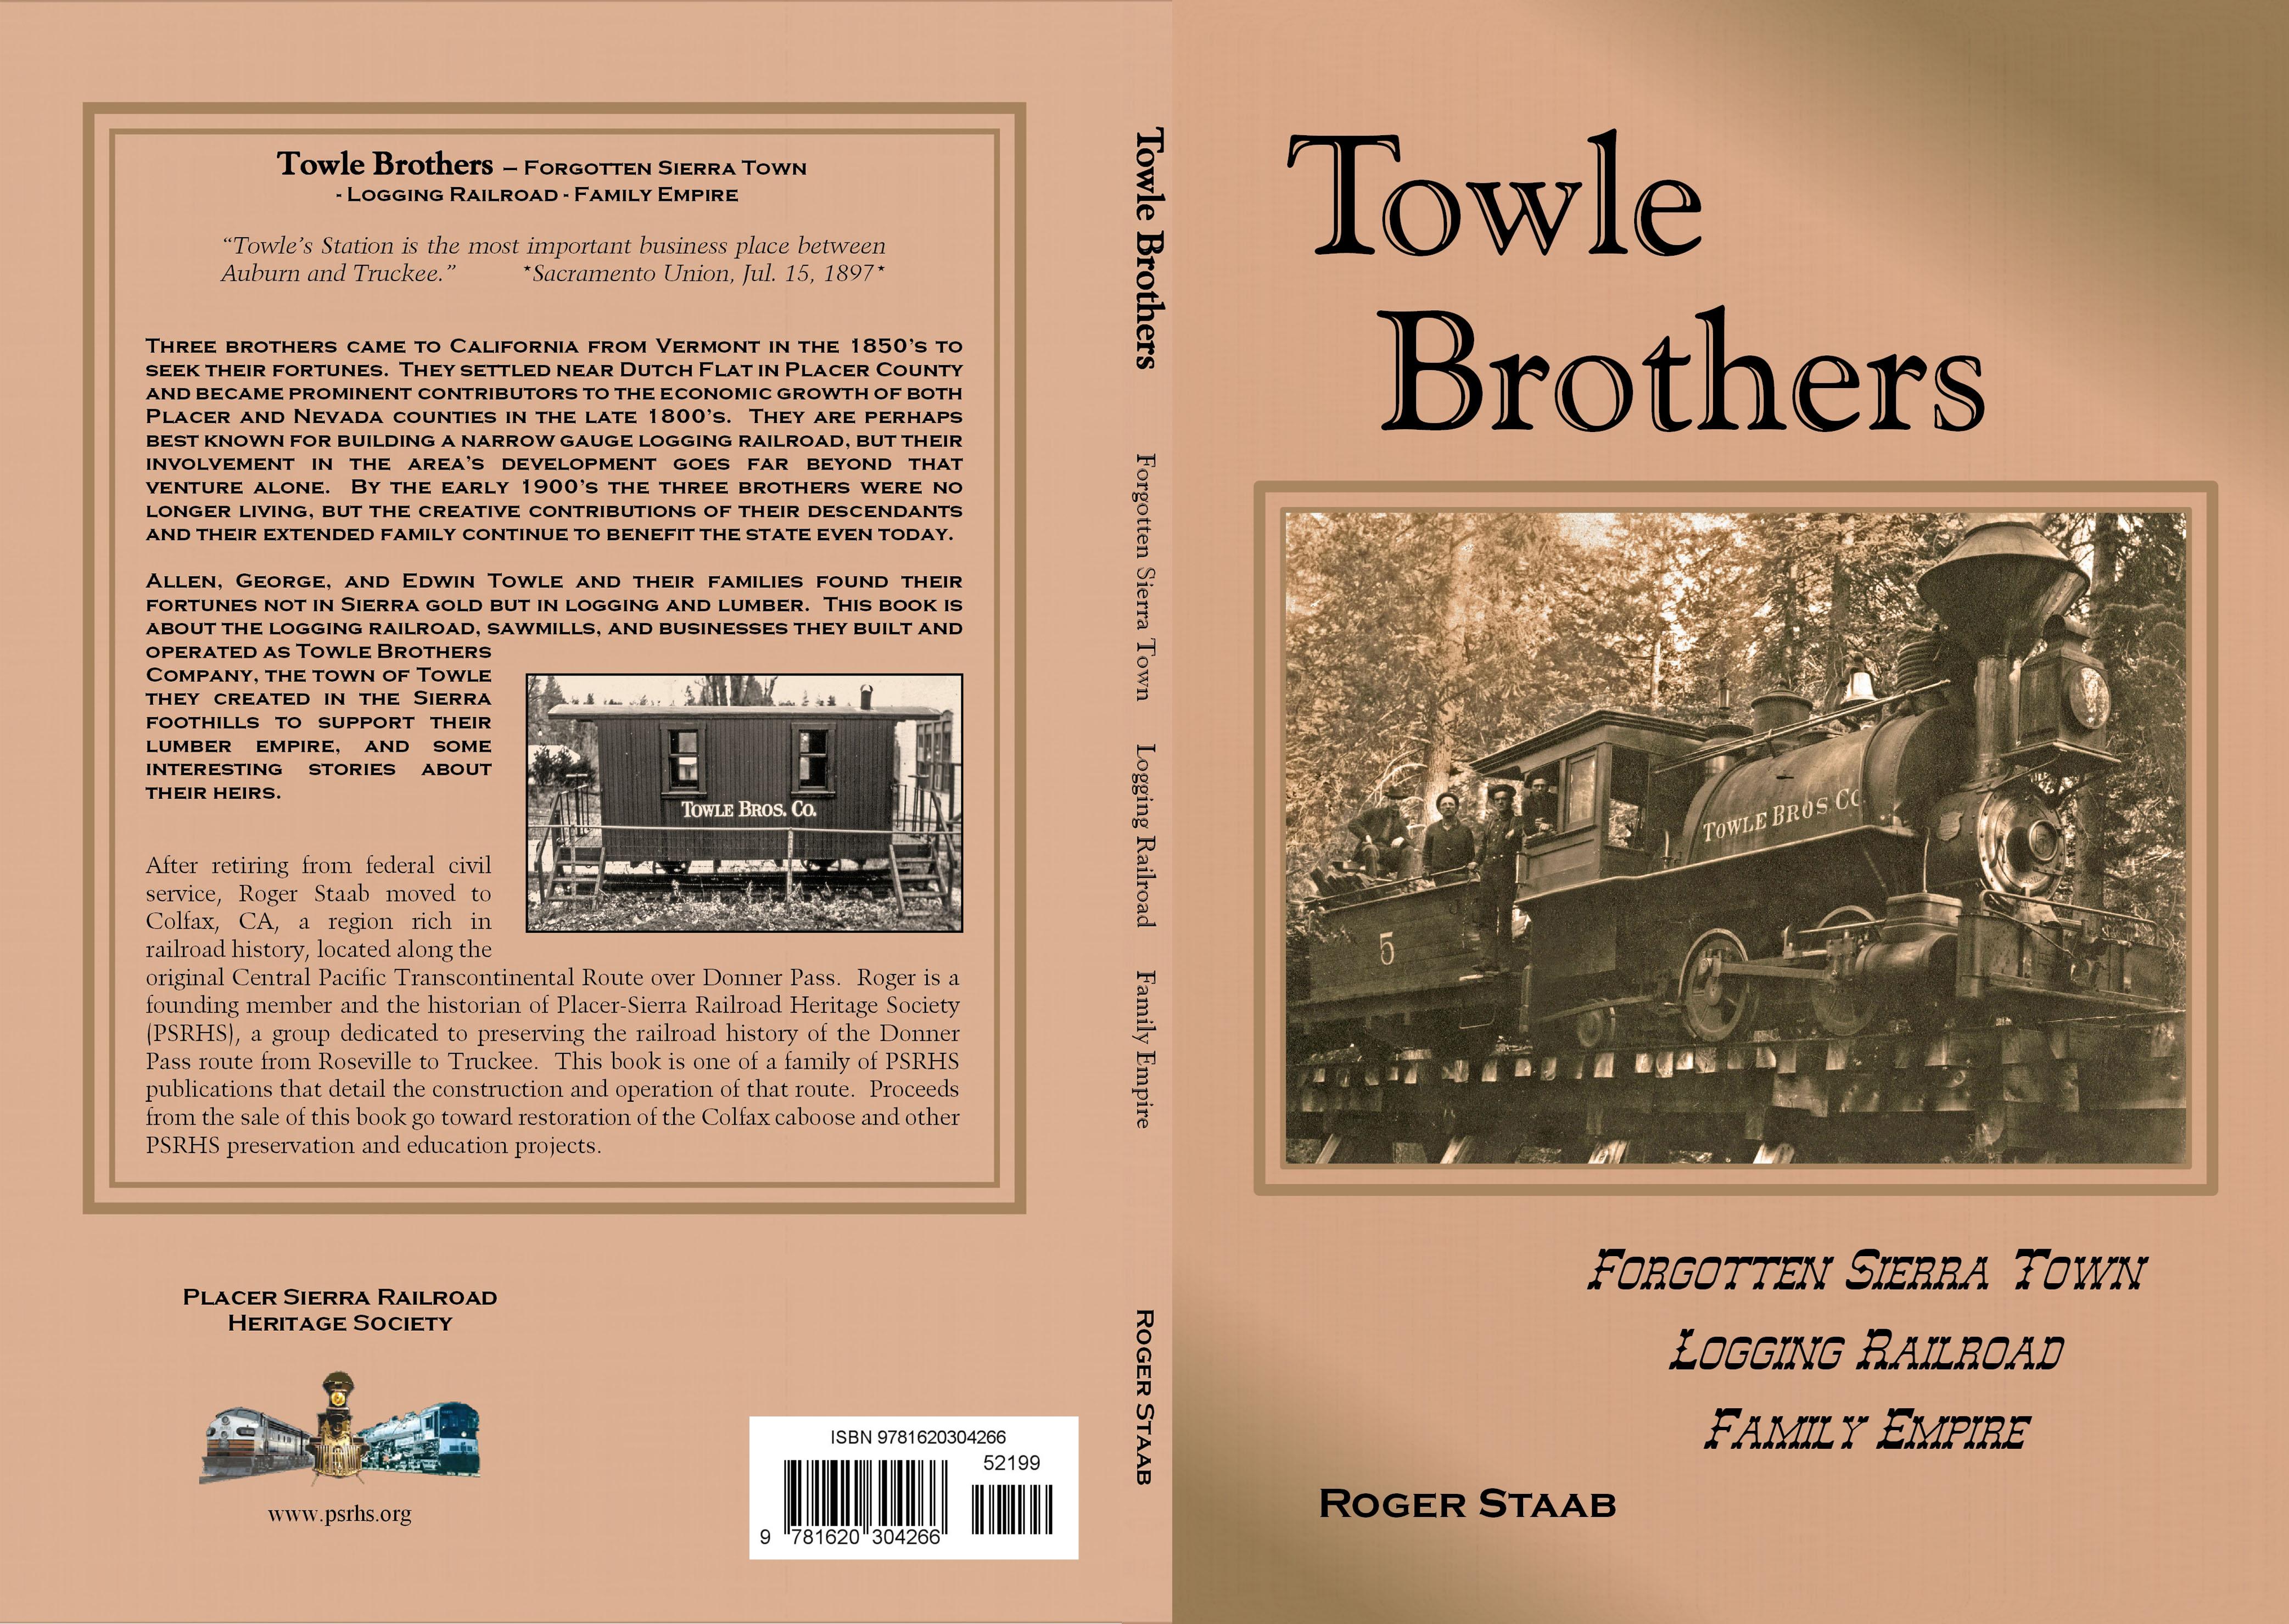 Towle Brothers cover image